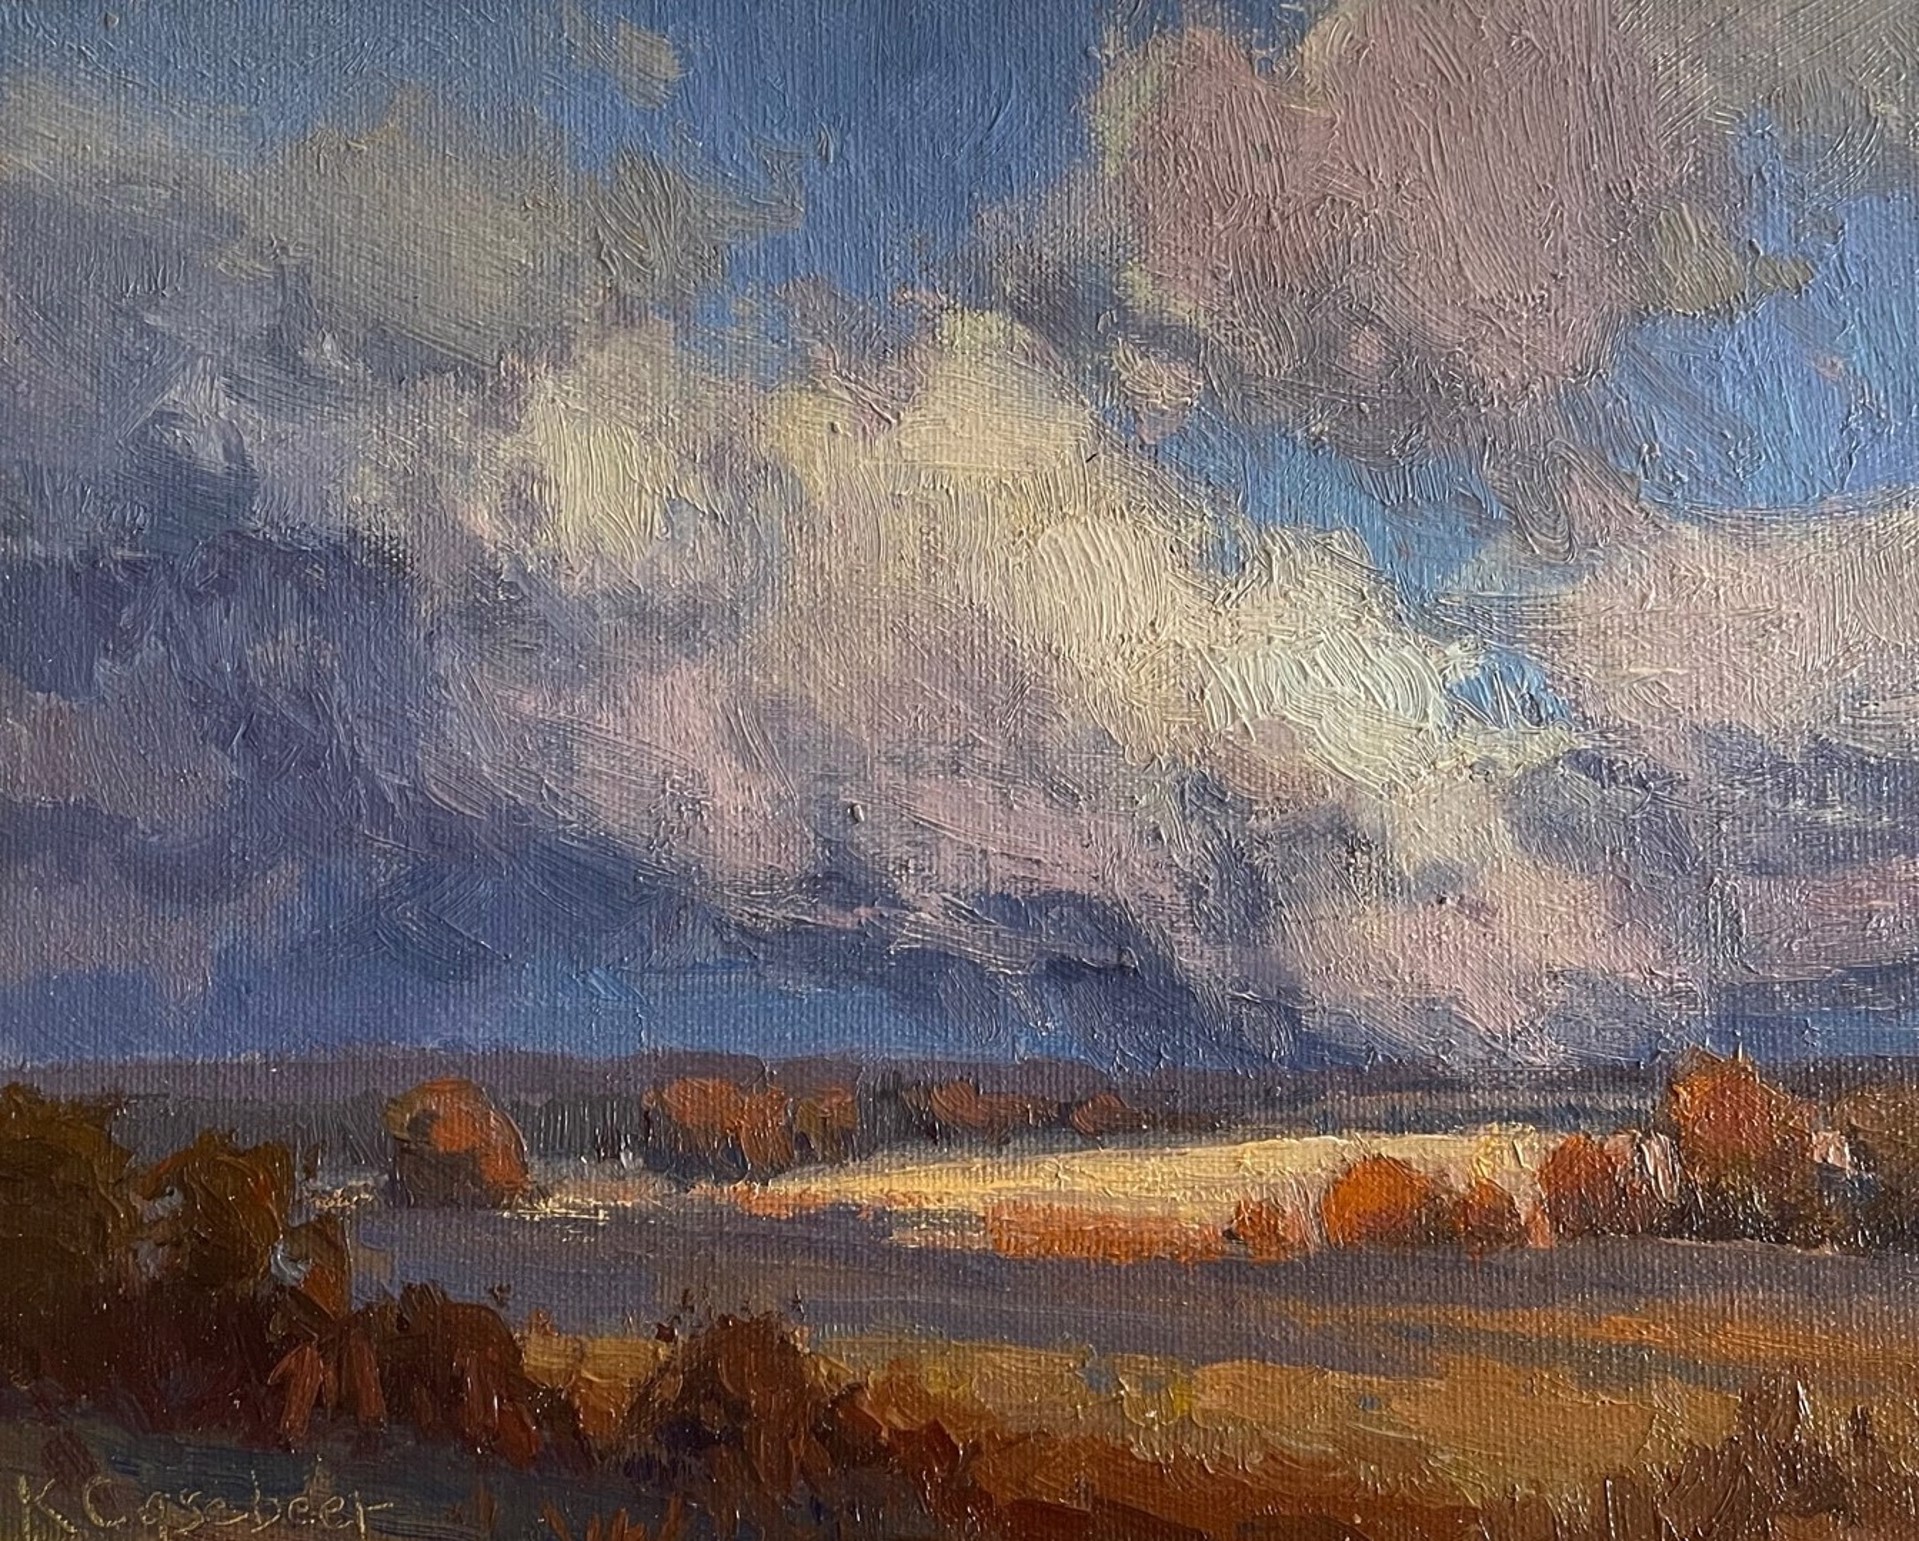 Fall Clouds by Kim Casebeer